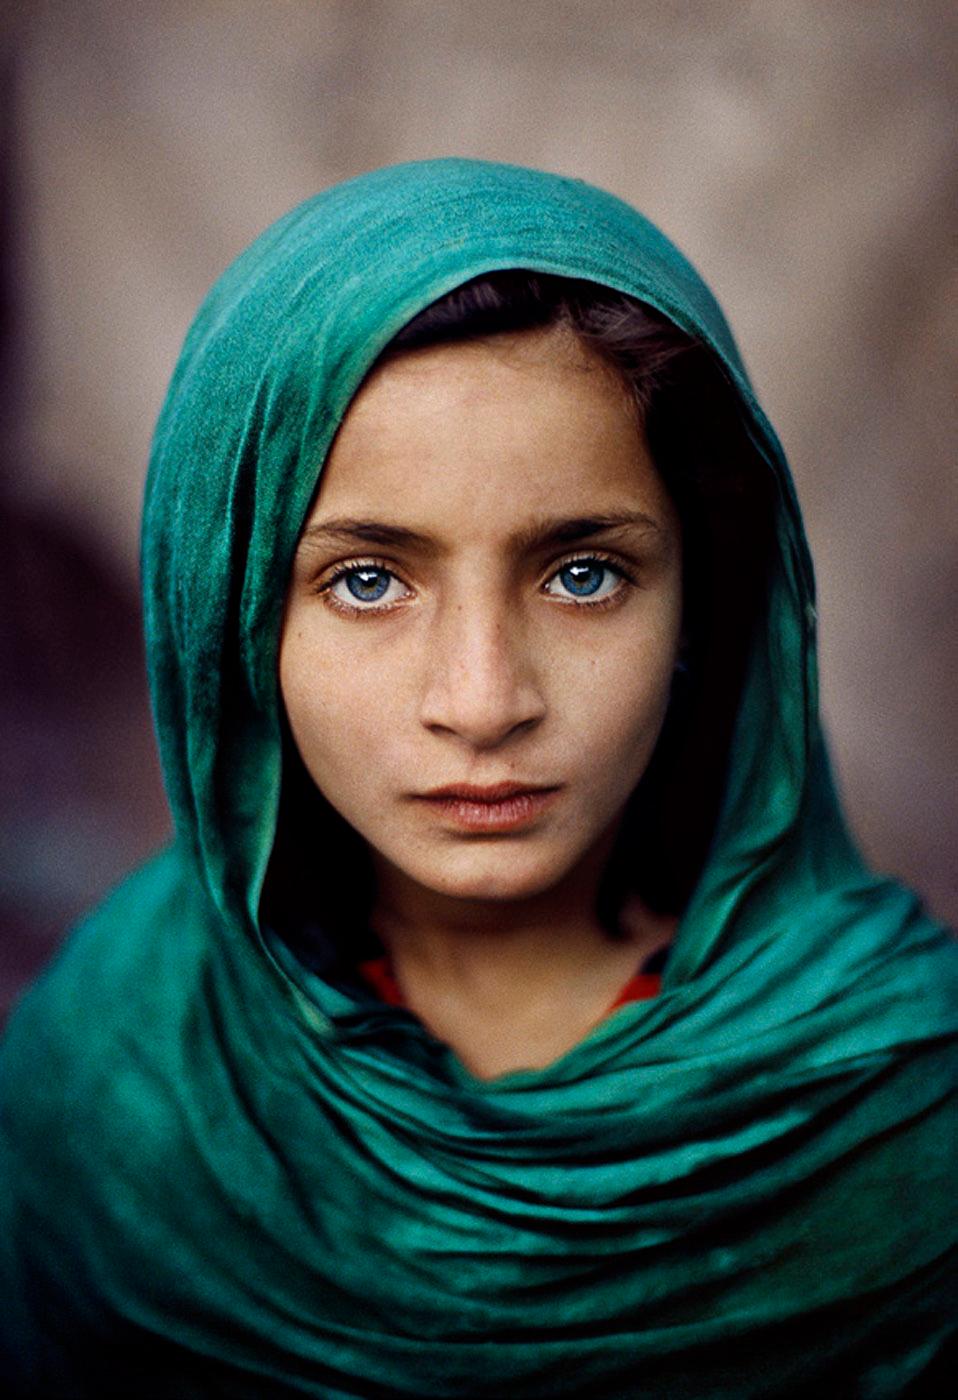 Steve McCurry 'Girl with Green Shawl'